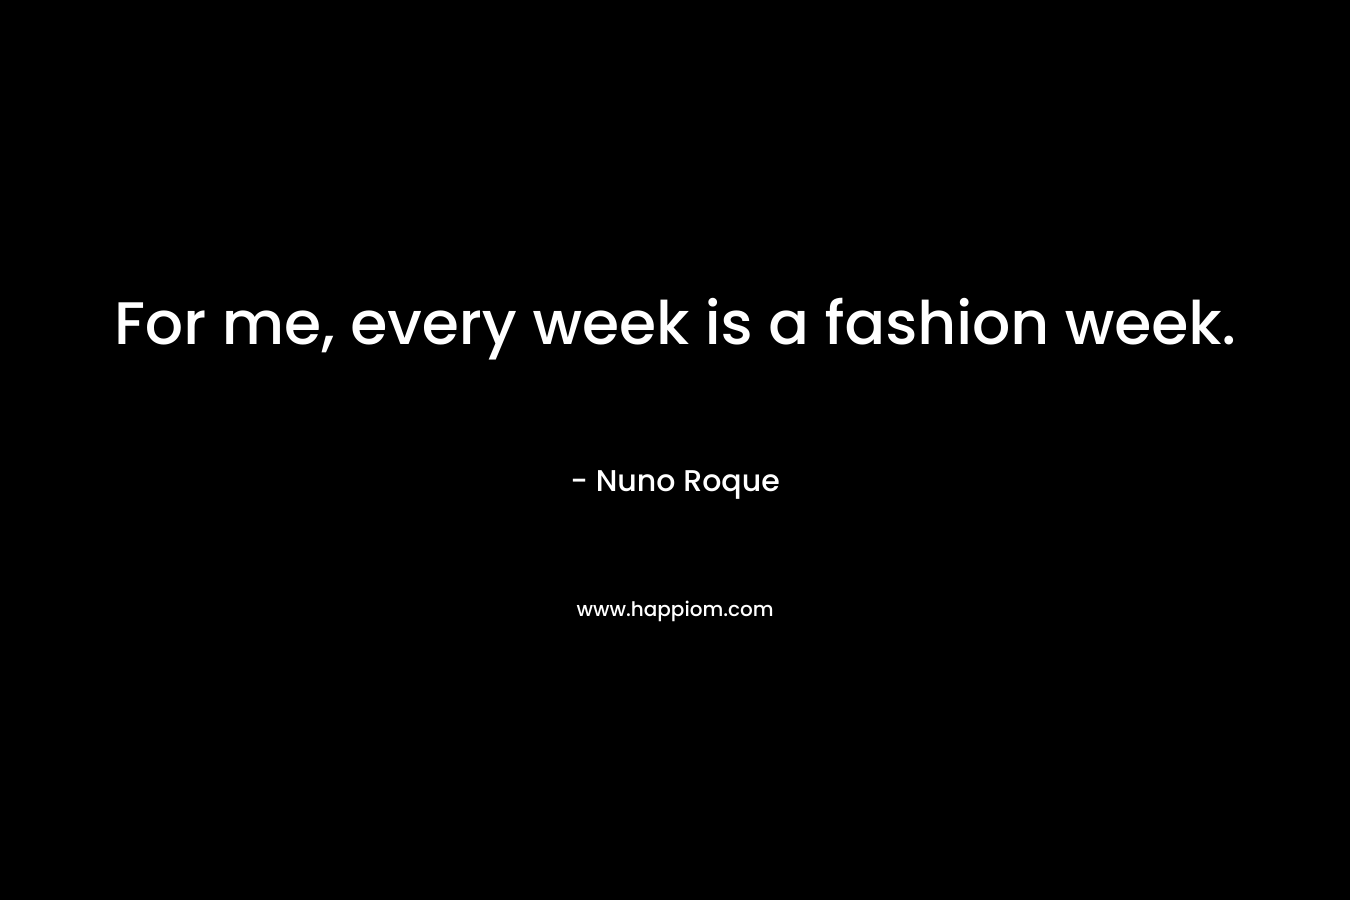 For me, every week is a fashion week.